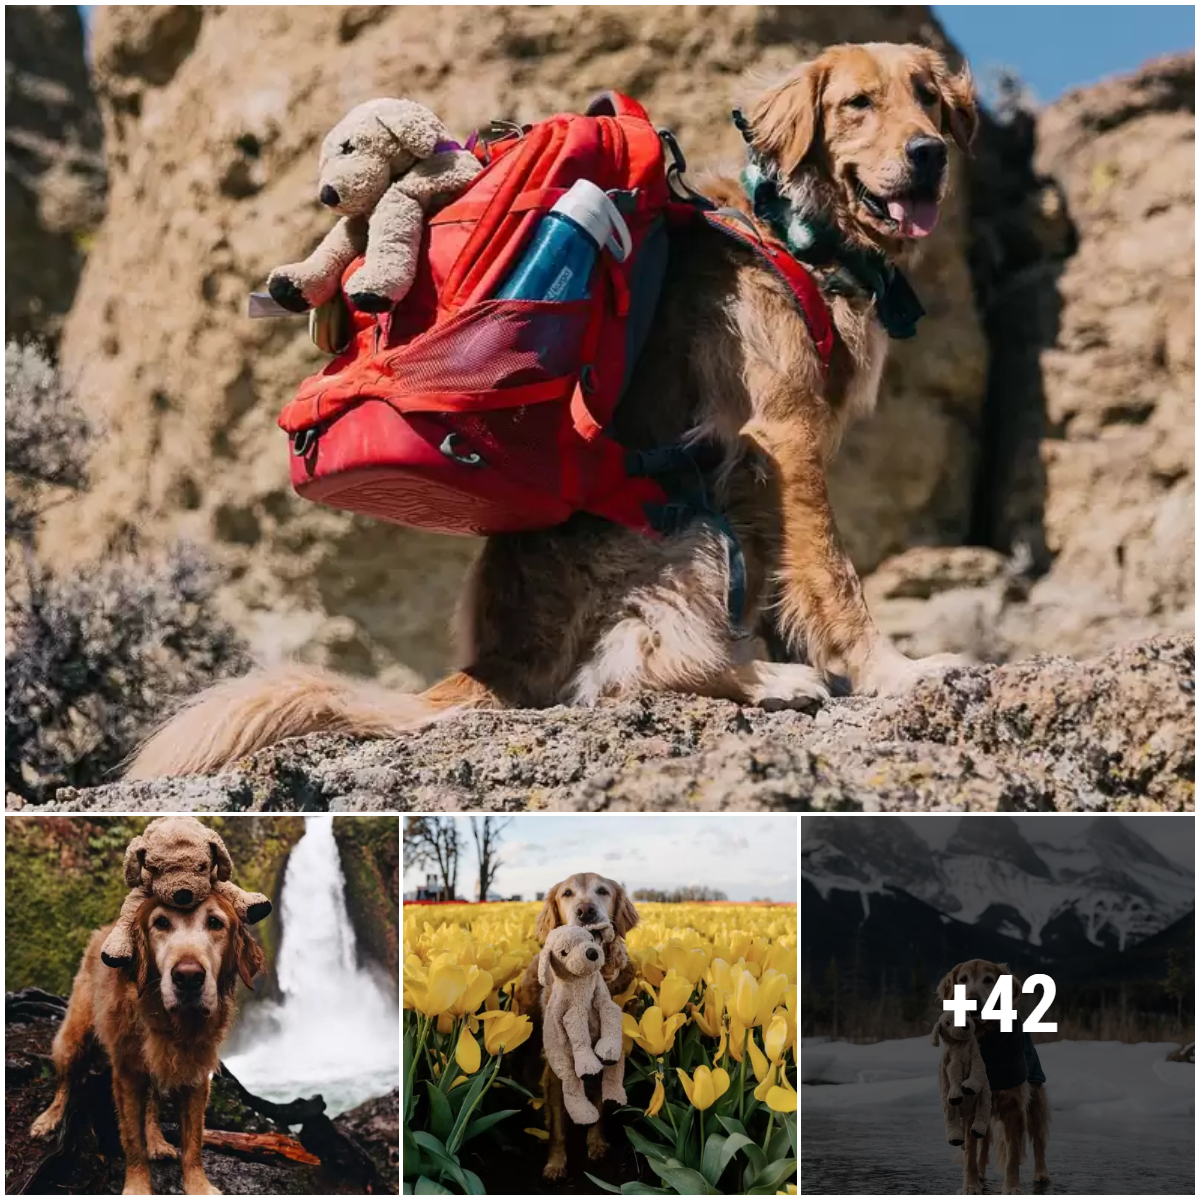 The unforgettable six-year adventure of an old dog and his identical toy on every trip – Inseparable adventurers